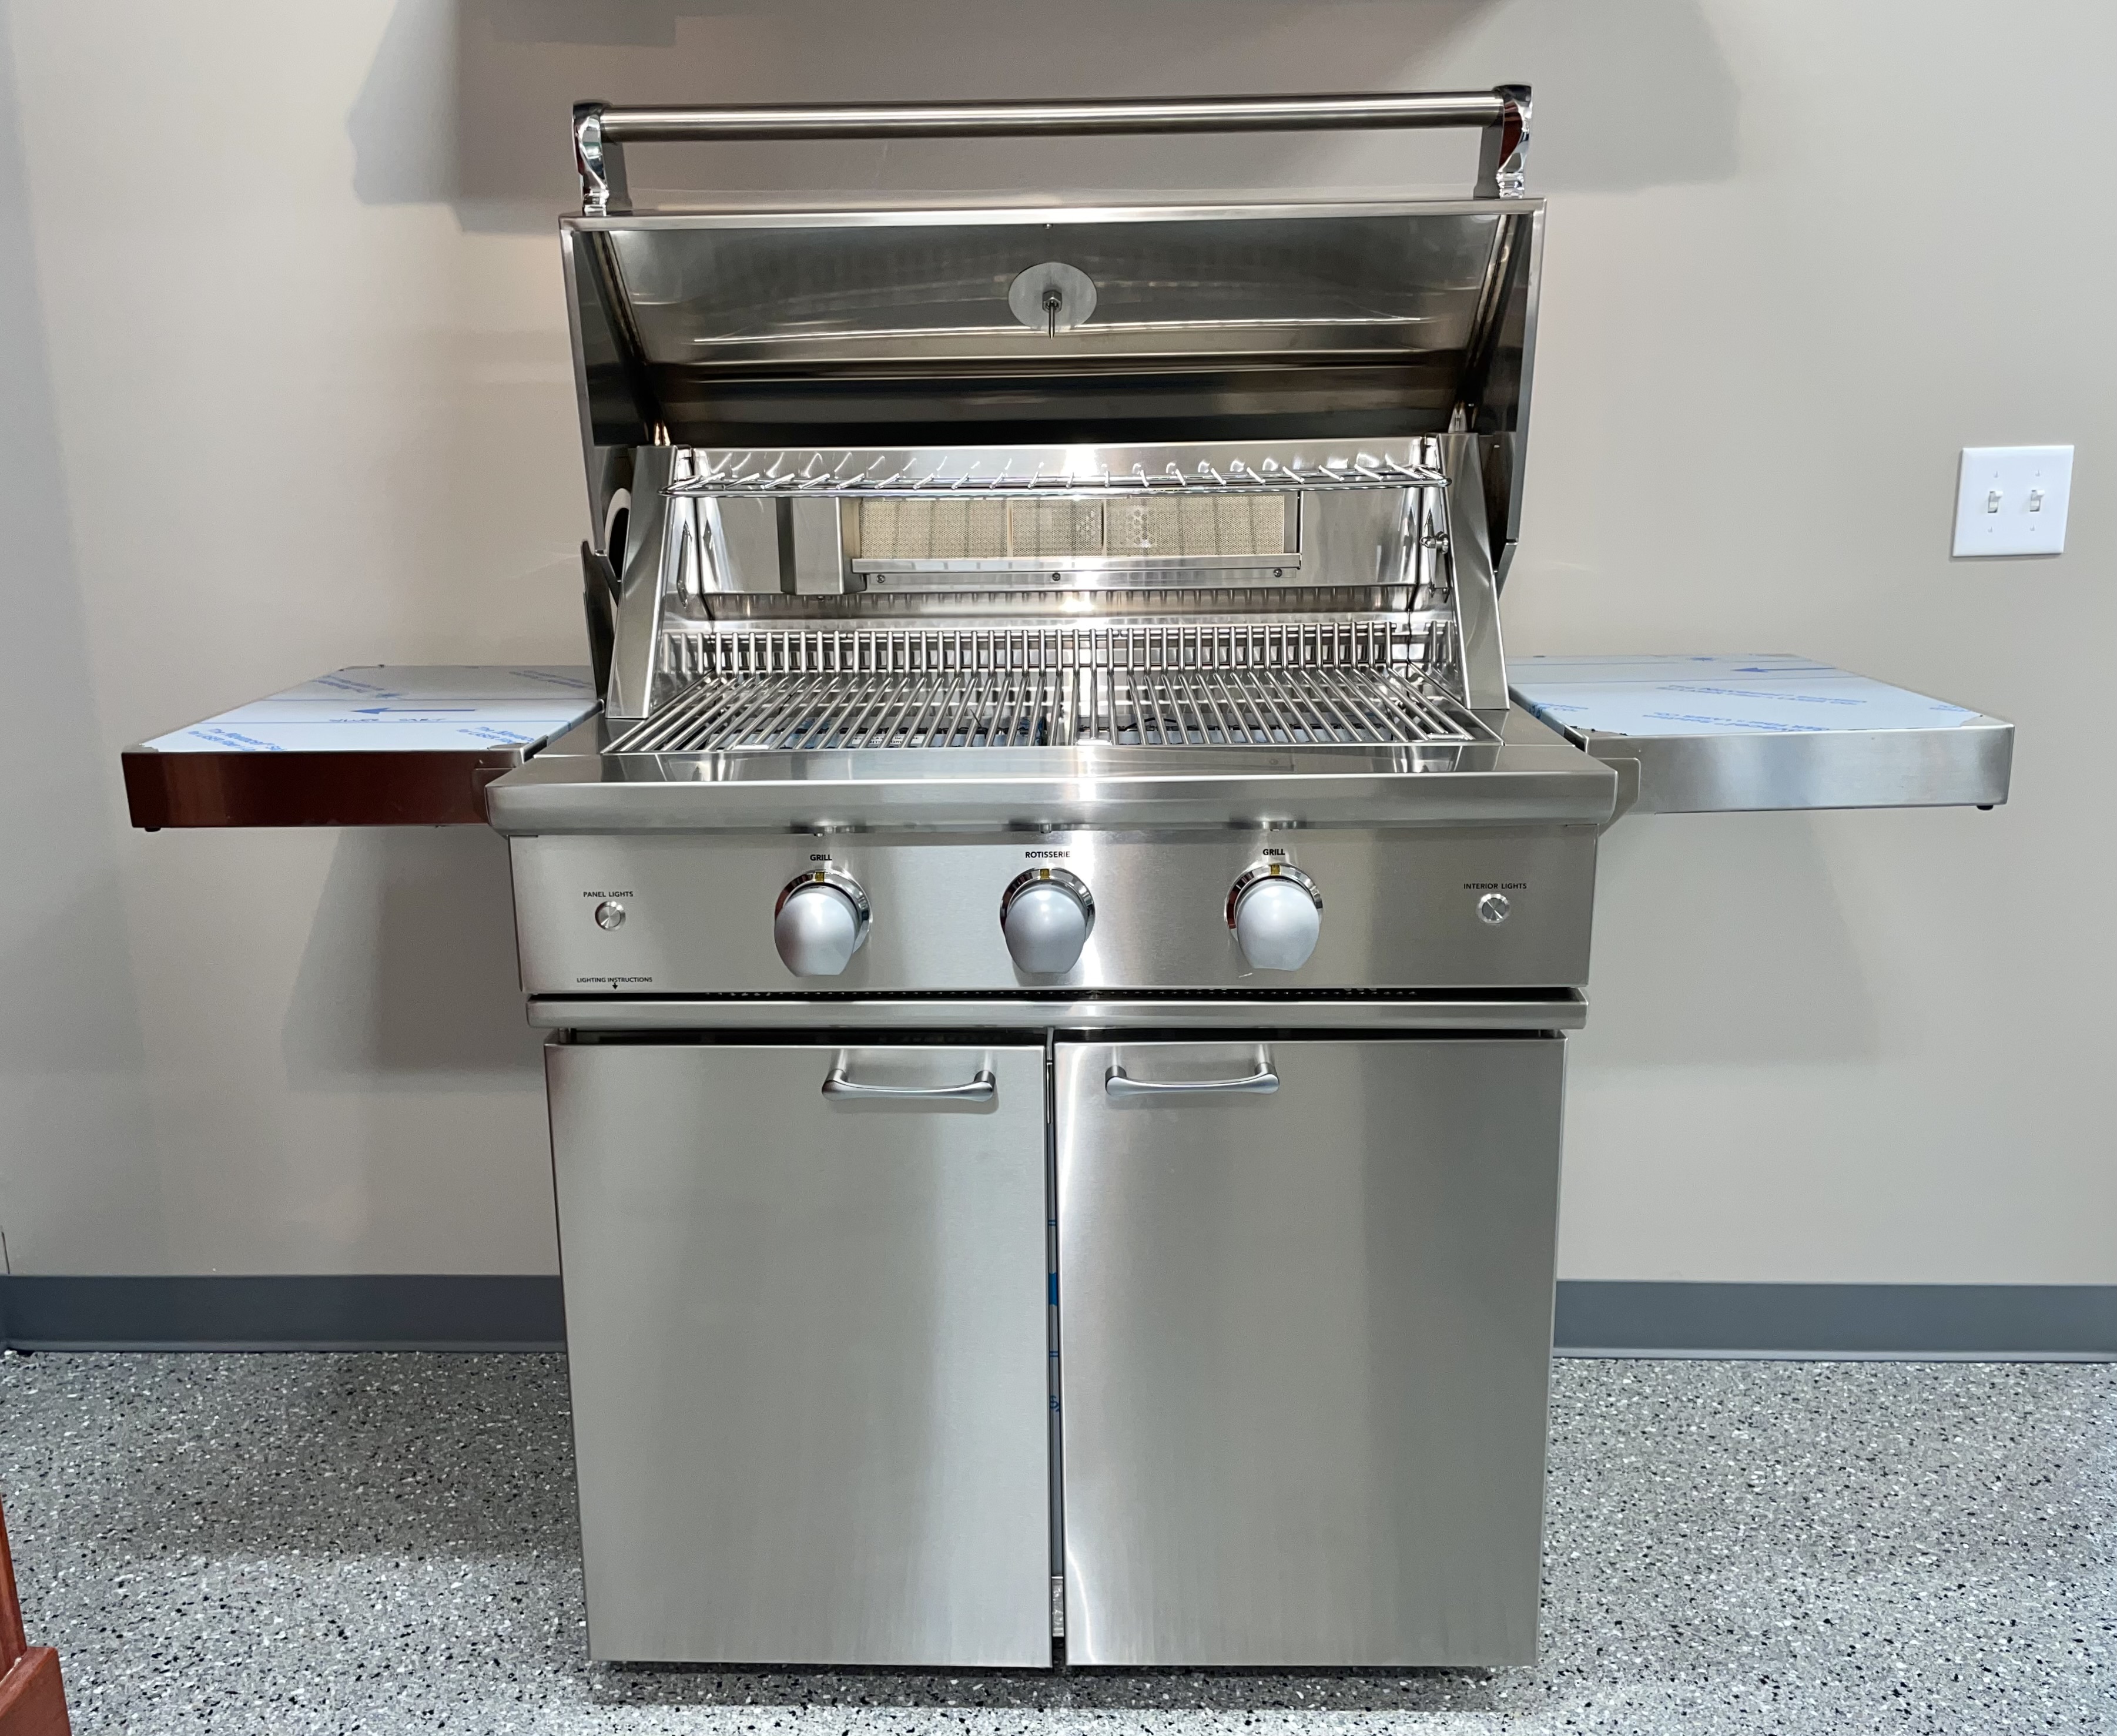 Caliber Appliances | Expect Great Heat | Crossflame Silver | Outdoor Grill | shadyoakdist.com